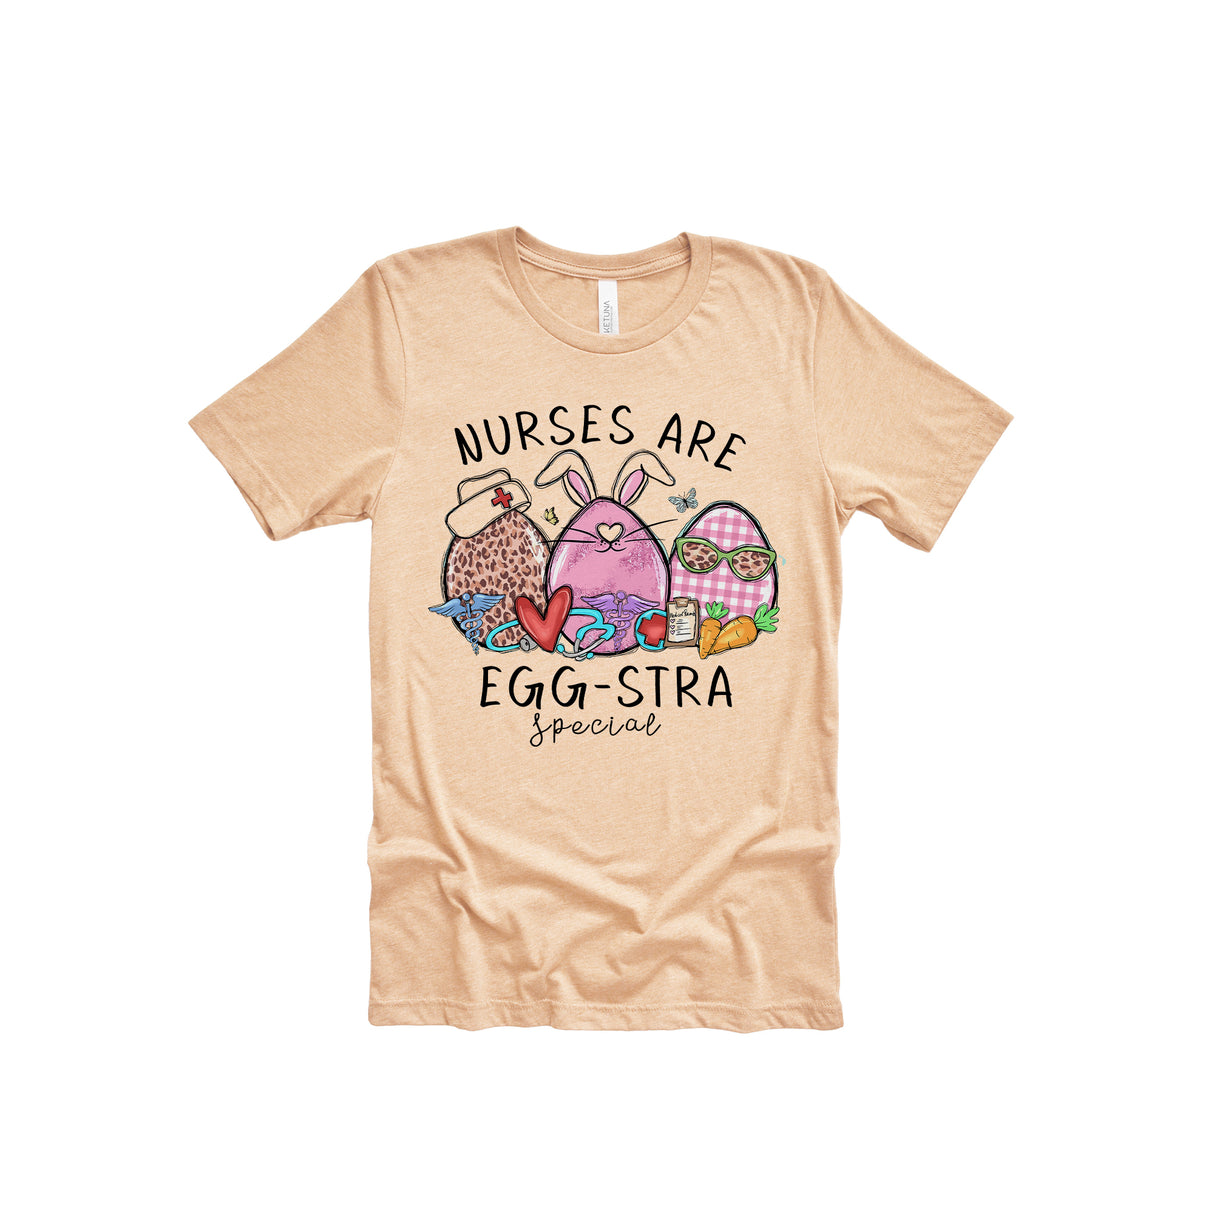 Nurses Are Egg-stra Special Unisex Adult T-Shirt